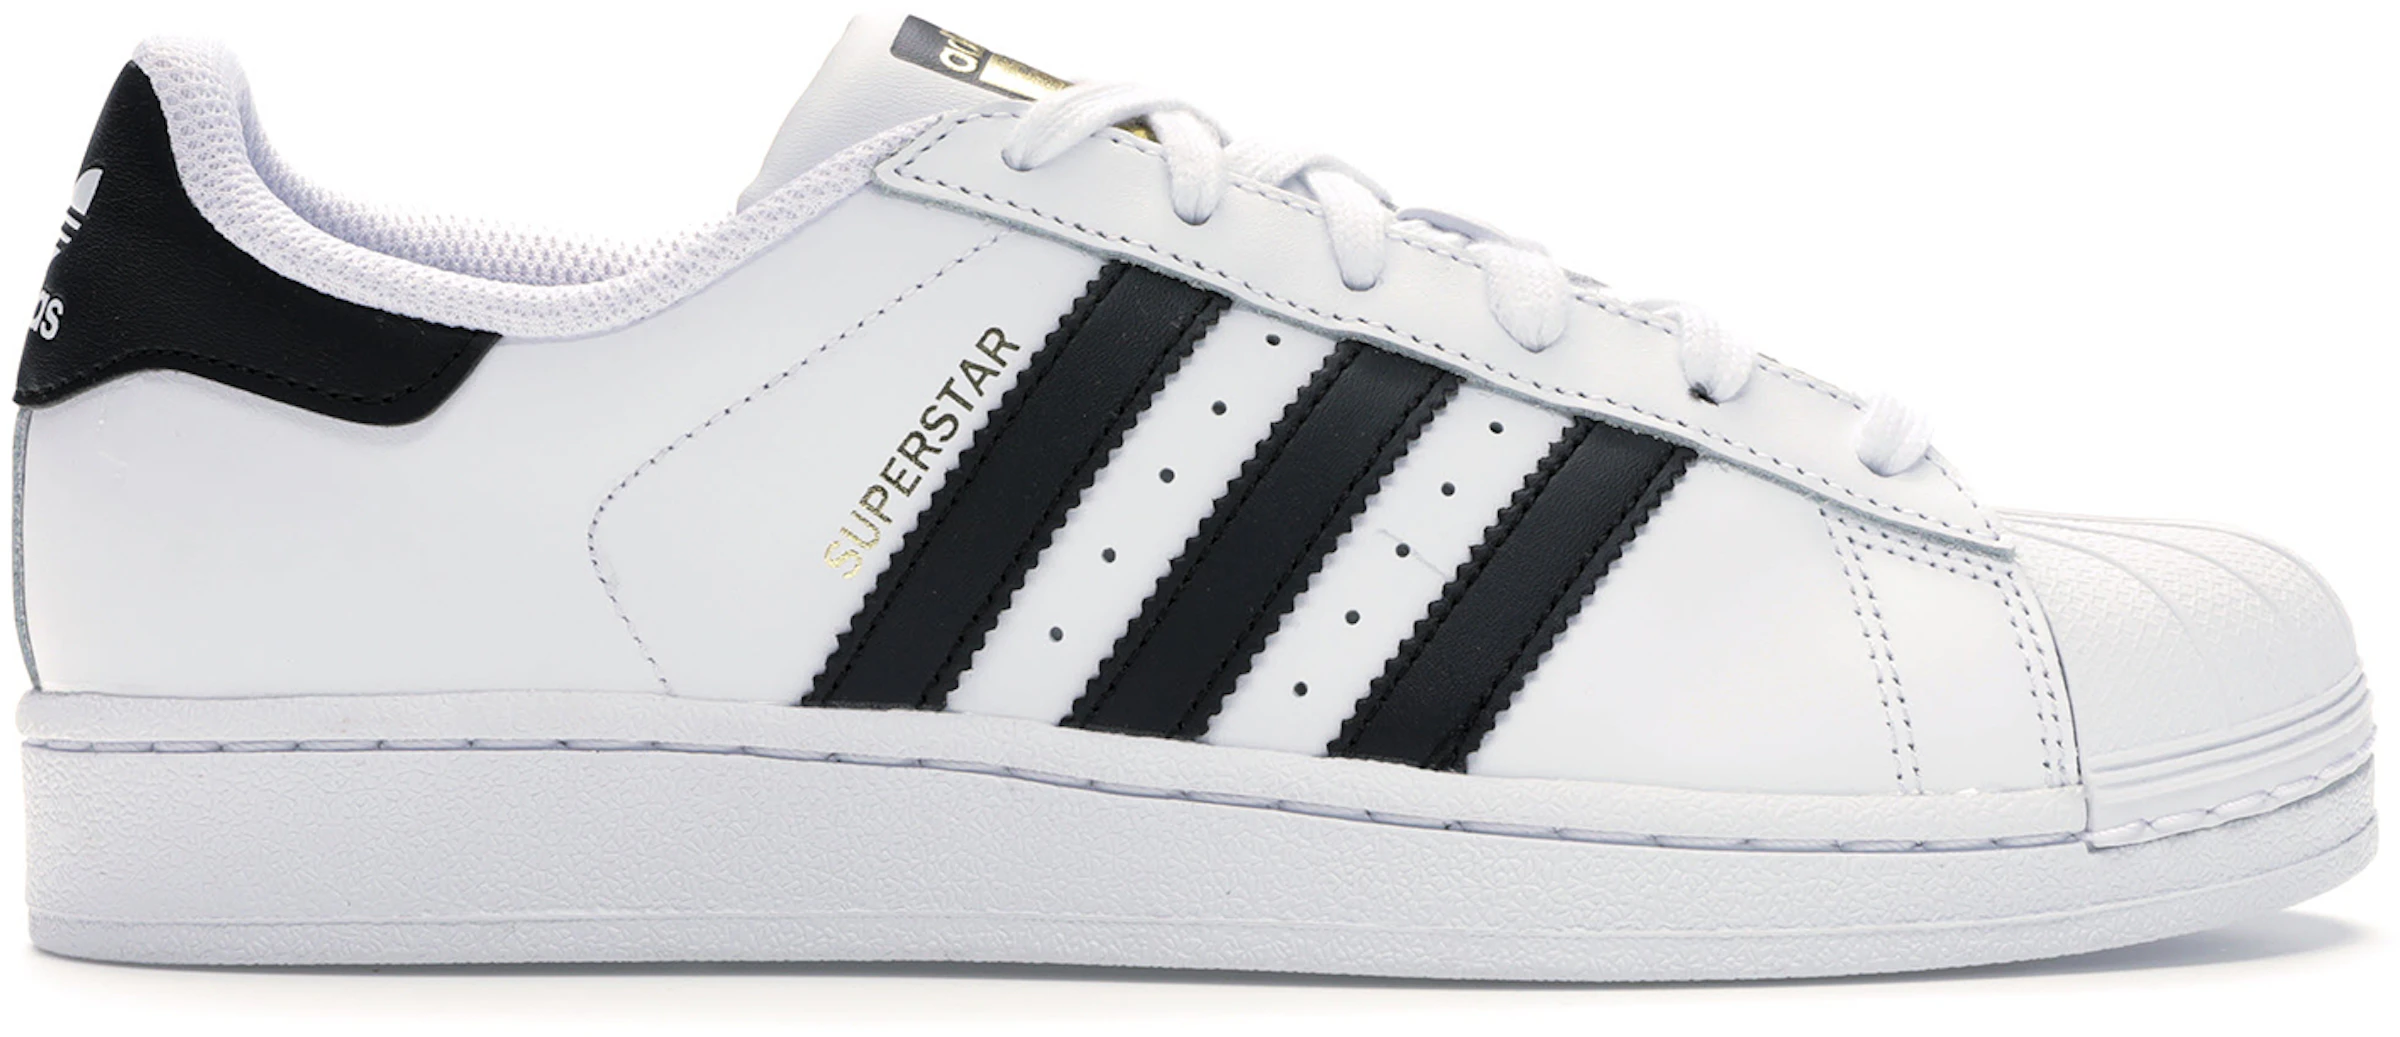 Superstar White (Youth) C77154 - US